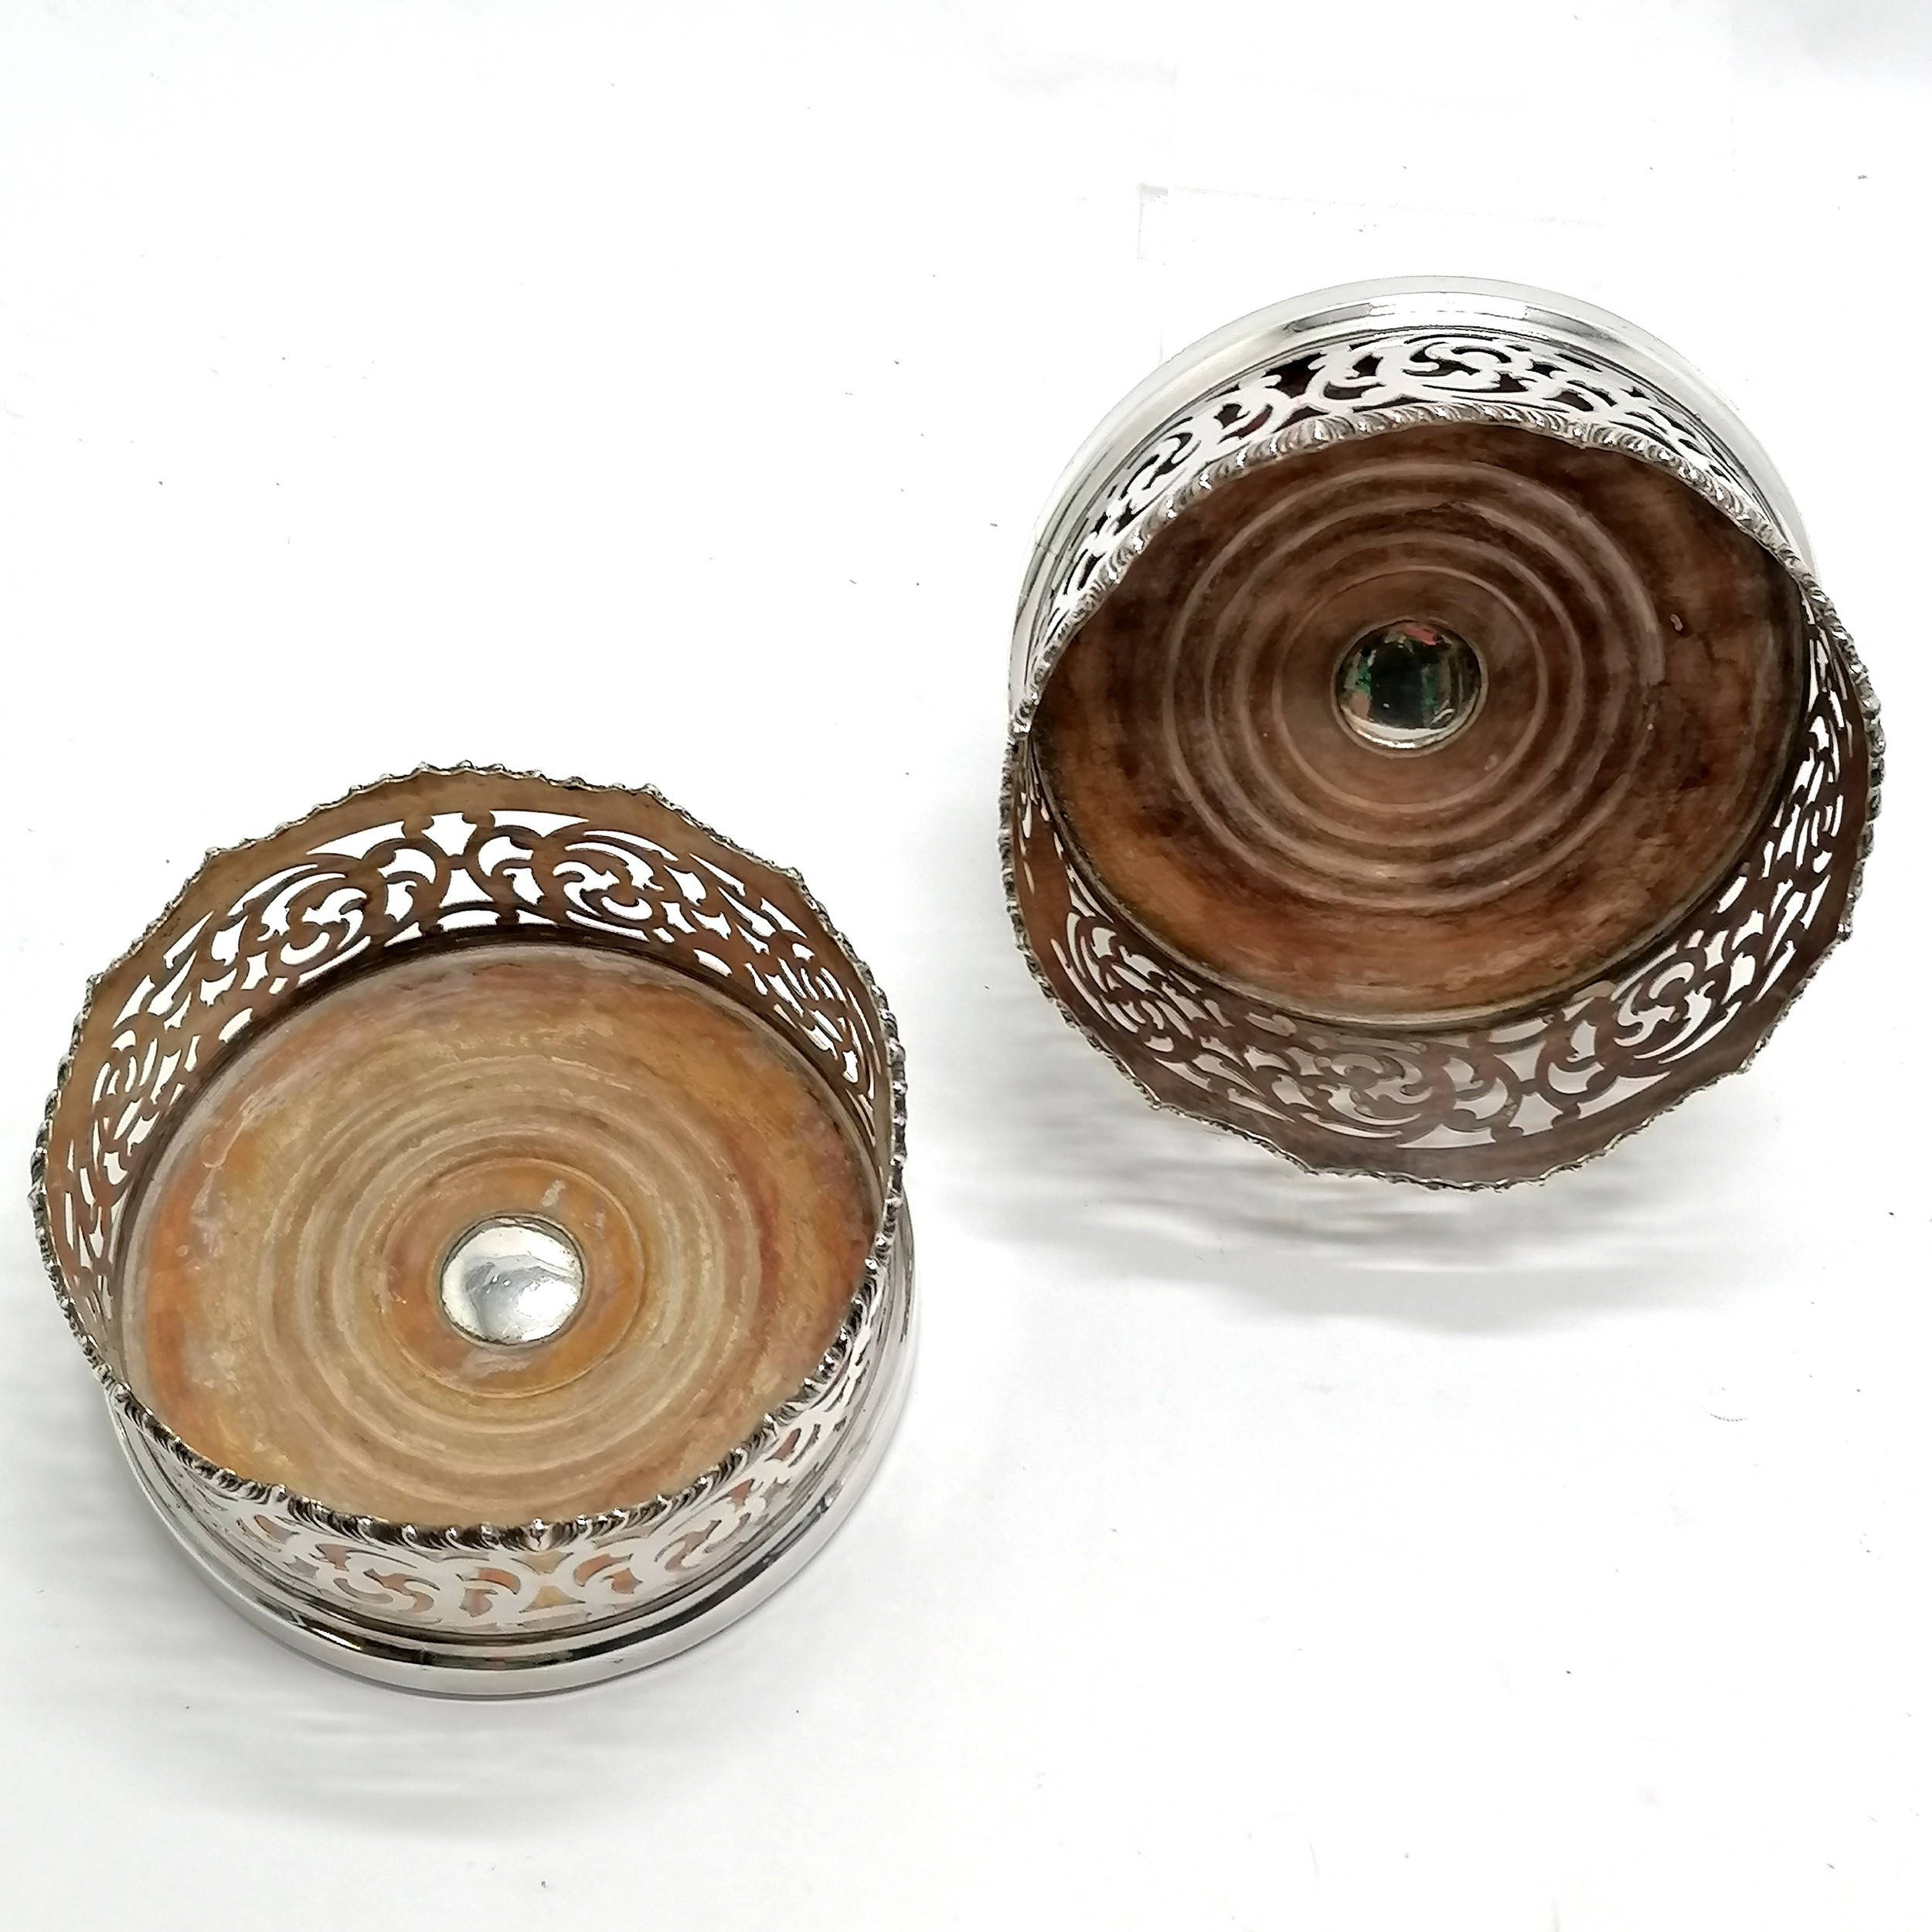 Pair of antique bottle coasters with turned wooden bases and high pierced gallery detail - 14cm - Image 5 of 5